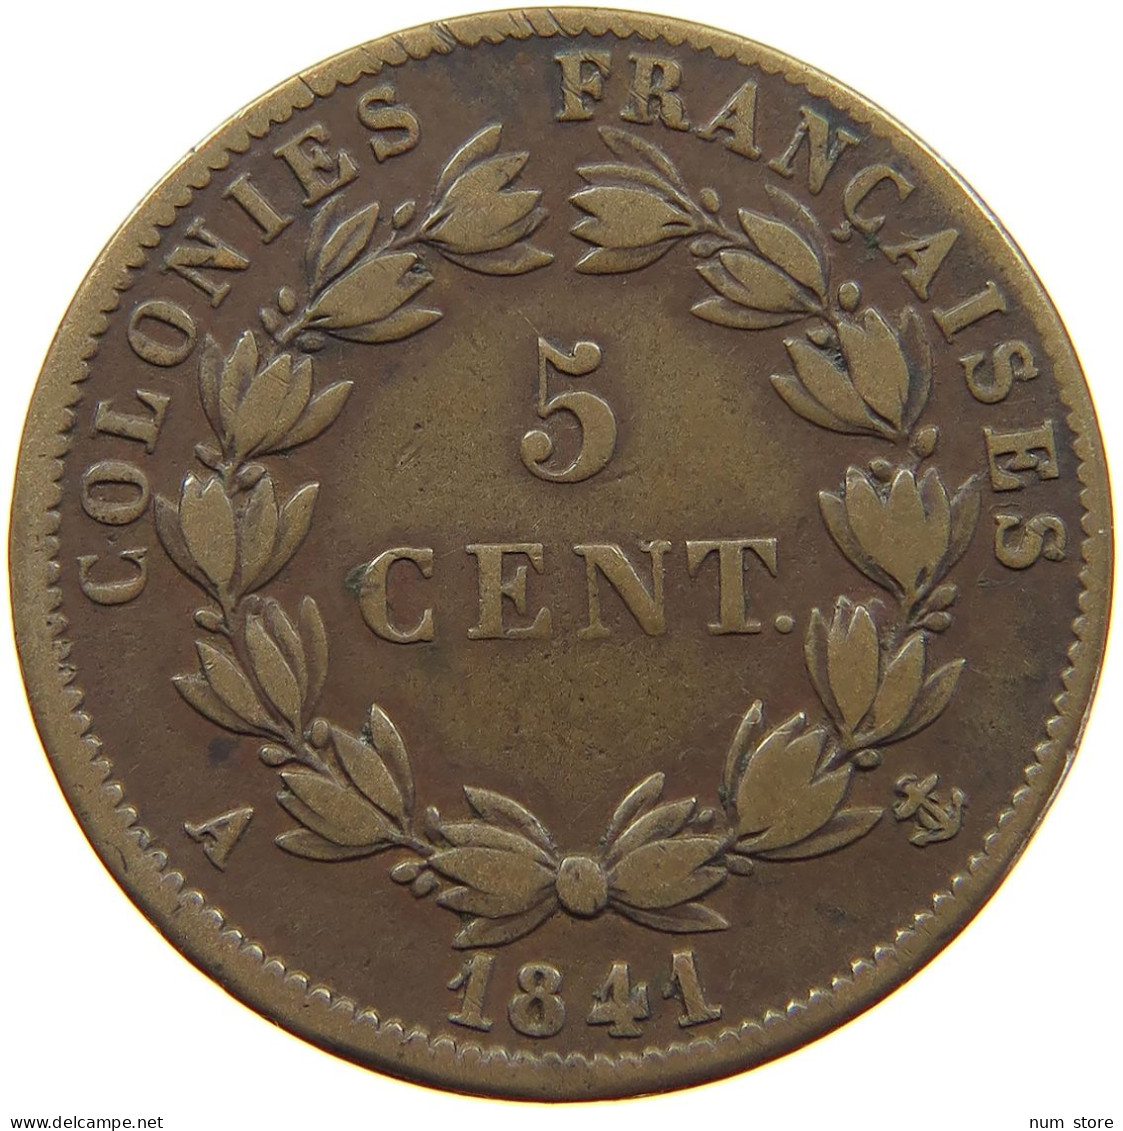 FRANCE COLONIES 5 CENTIMES 1841 A LOUIS PHILIPPE I. (1830-1848) #t158 0659 - French Colonies (1817-1844)